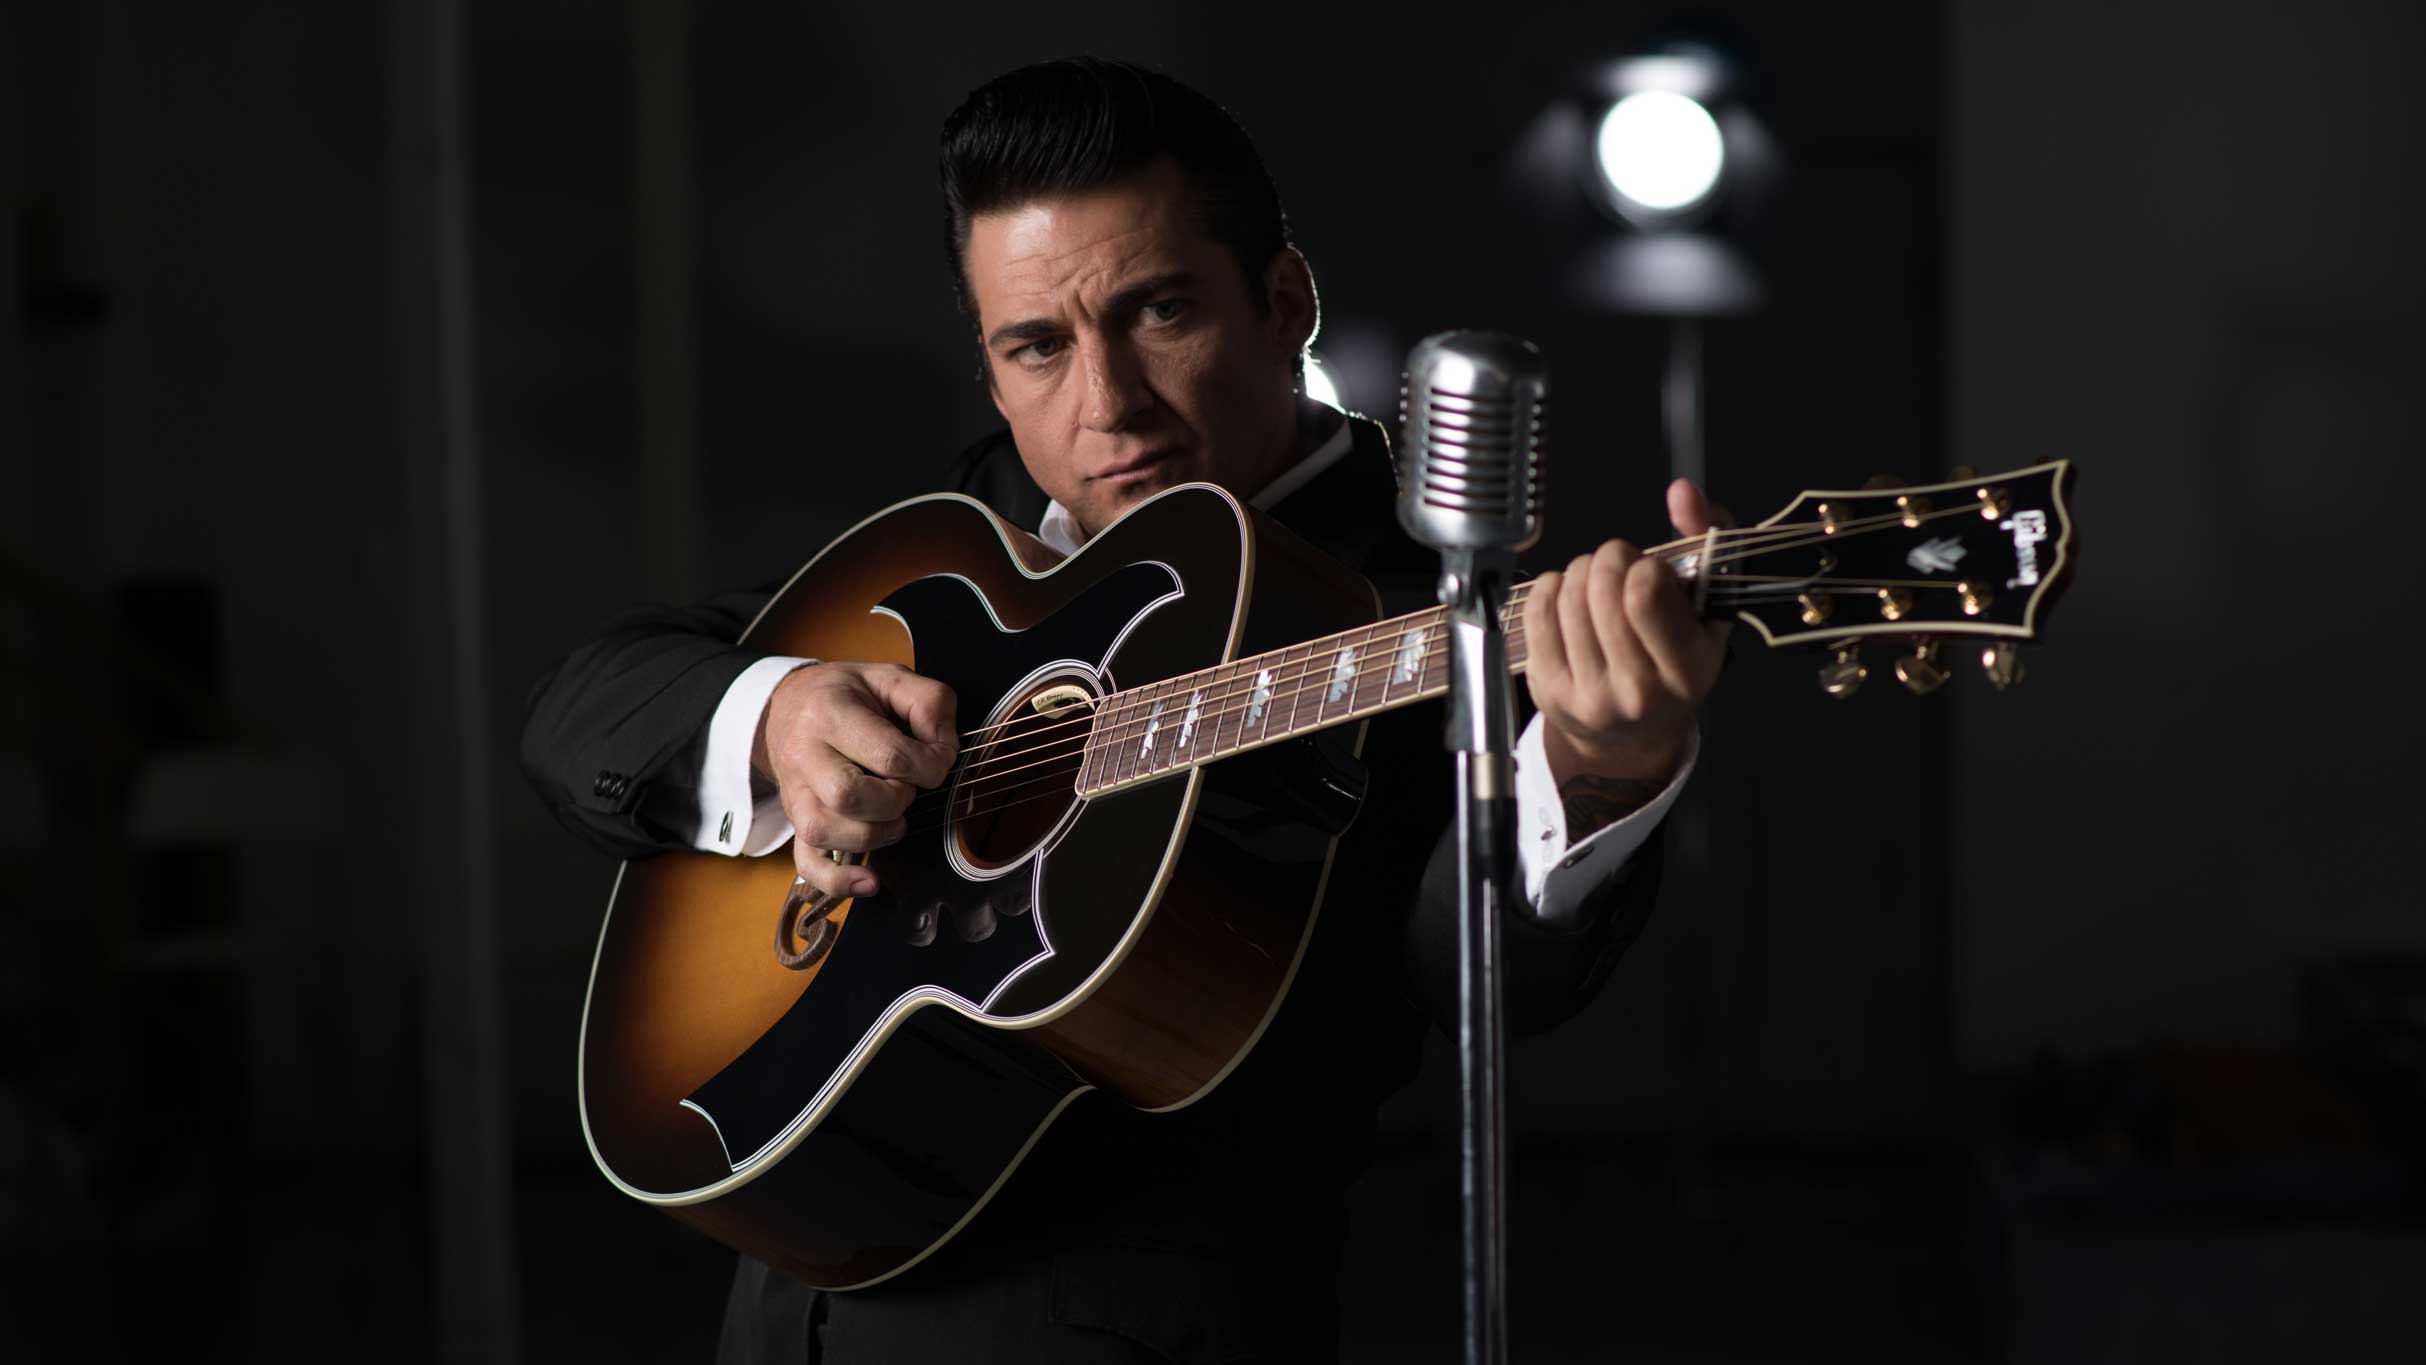 The Man in Black: A Tribute to Johnny Cash in Red Bank promo photo for Member presale offer code